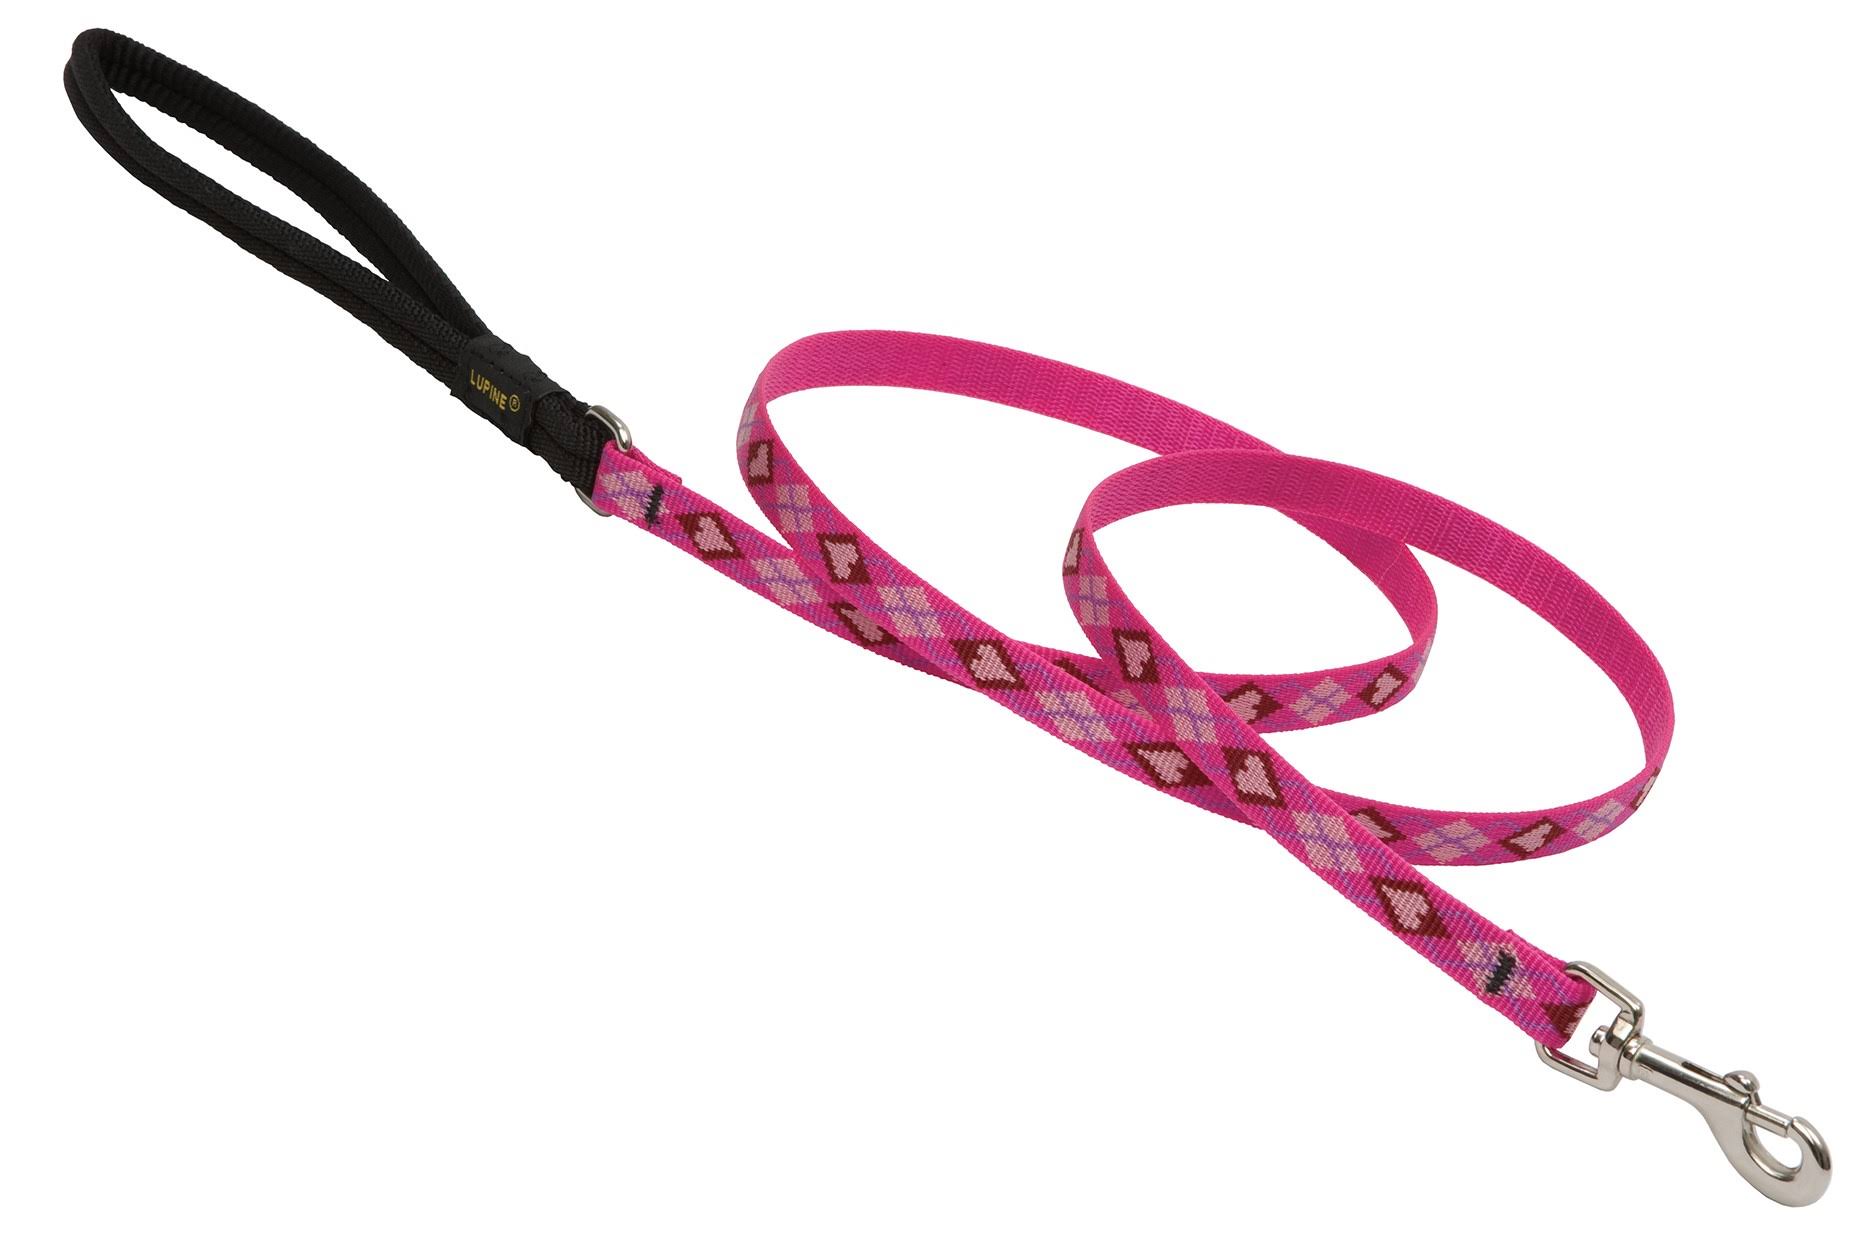 Lupine Puppy Love Dog Leash - 1/2in x 6ft